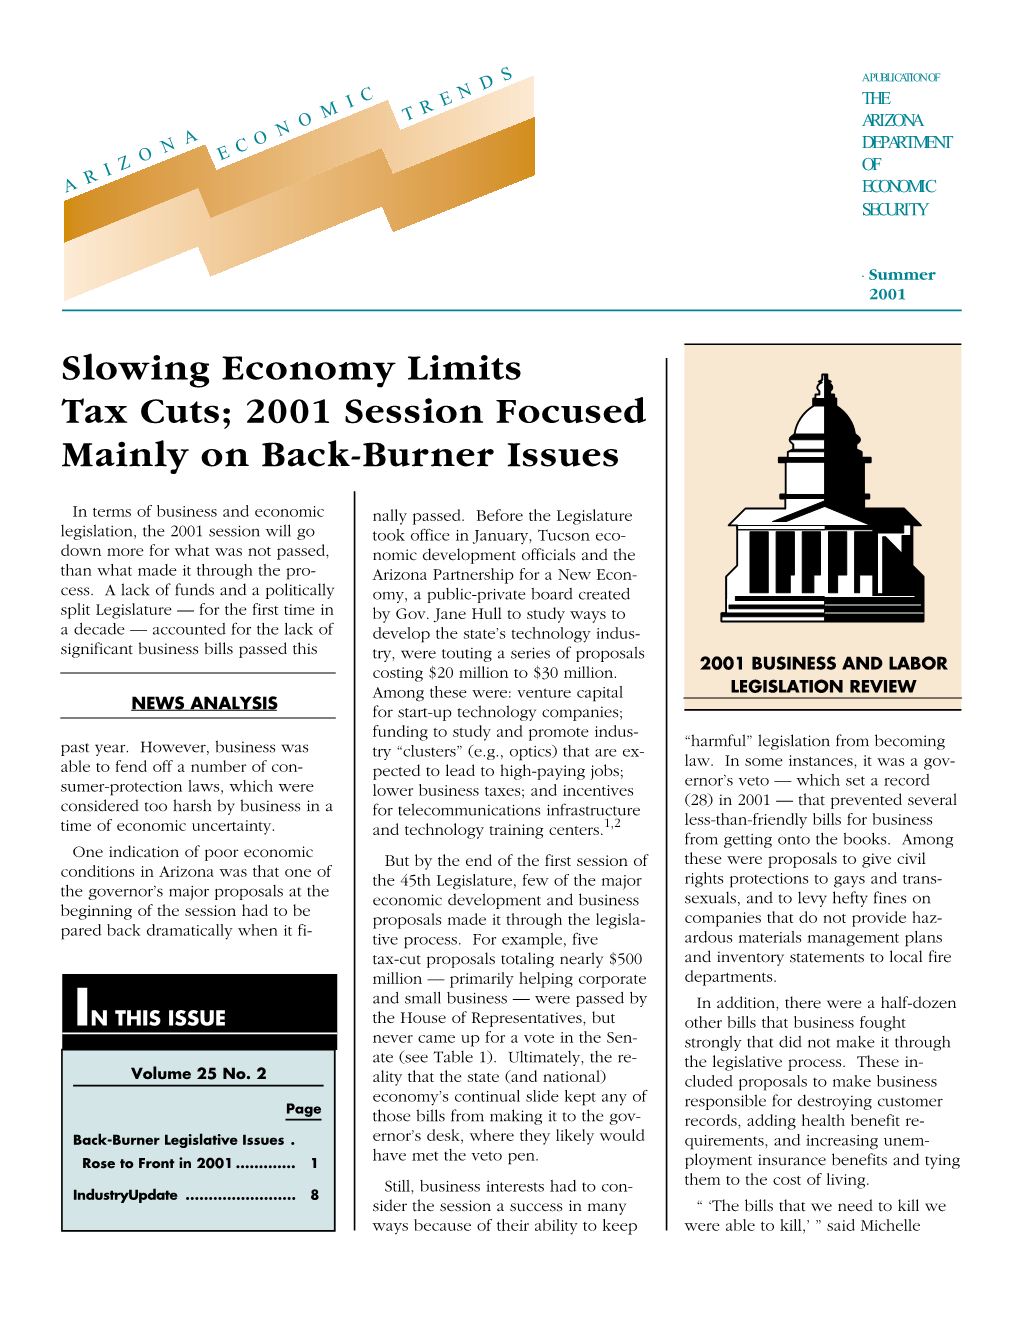 Slowing Economy Limits Tax Cuts; 2001 Session Ocused Mainly on Back-Burner Issues